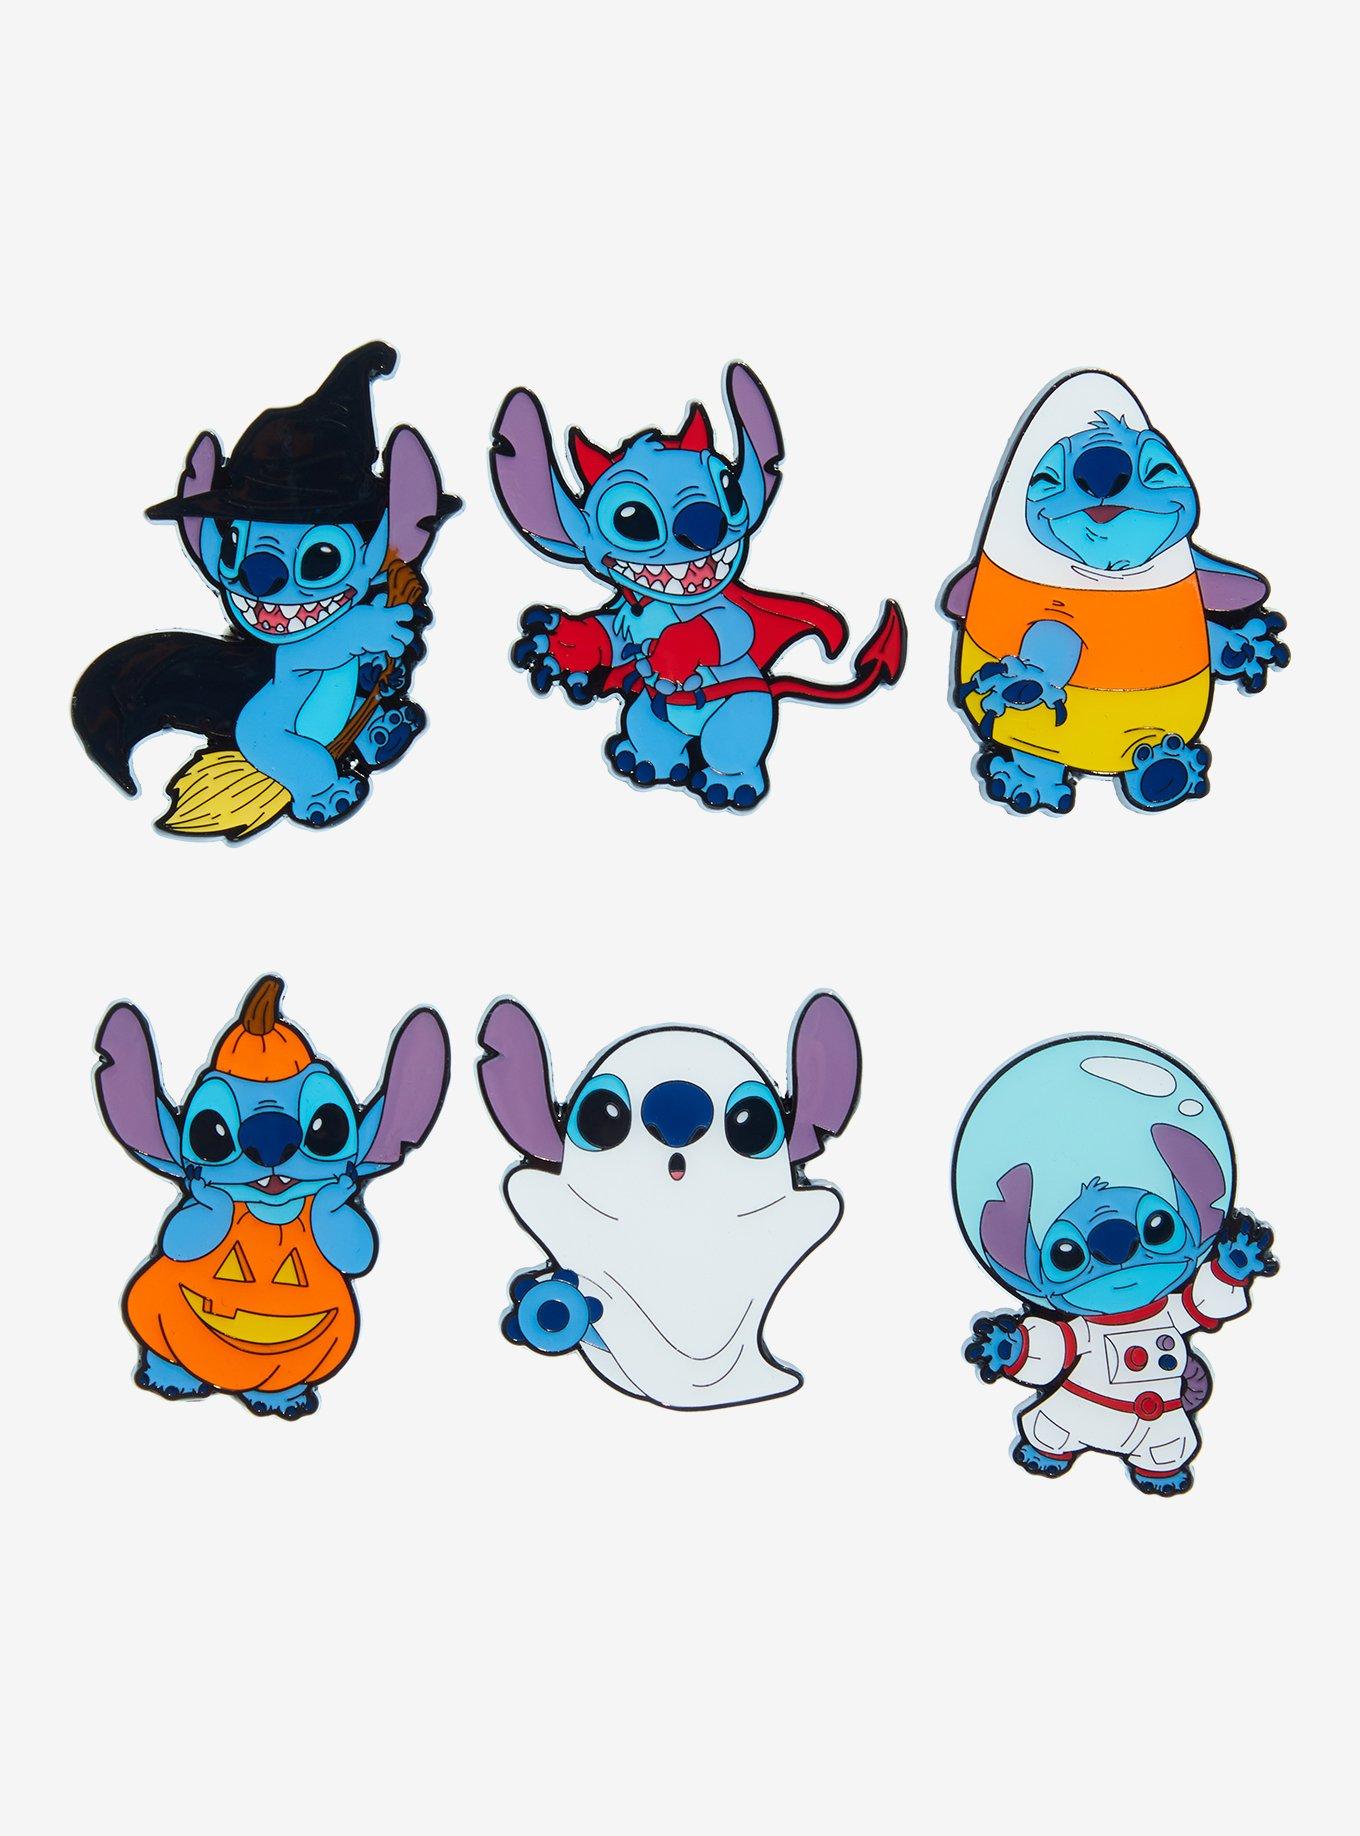 Stitch in Baby Yoda Costume Lilo And Stitch Cartoon Character Enamel Metal  Pin